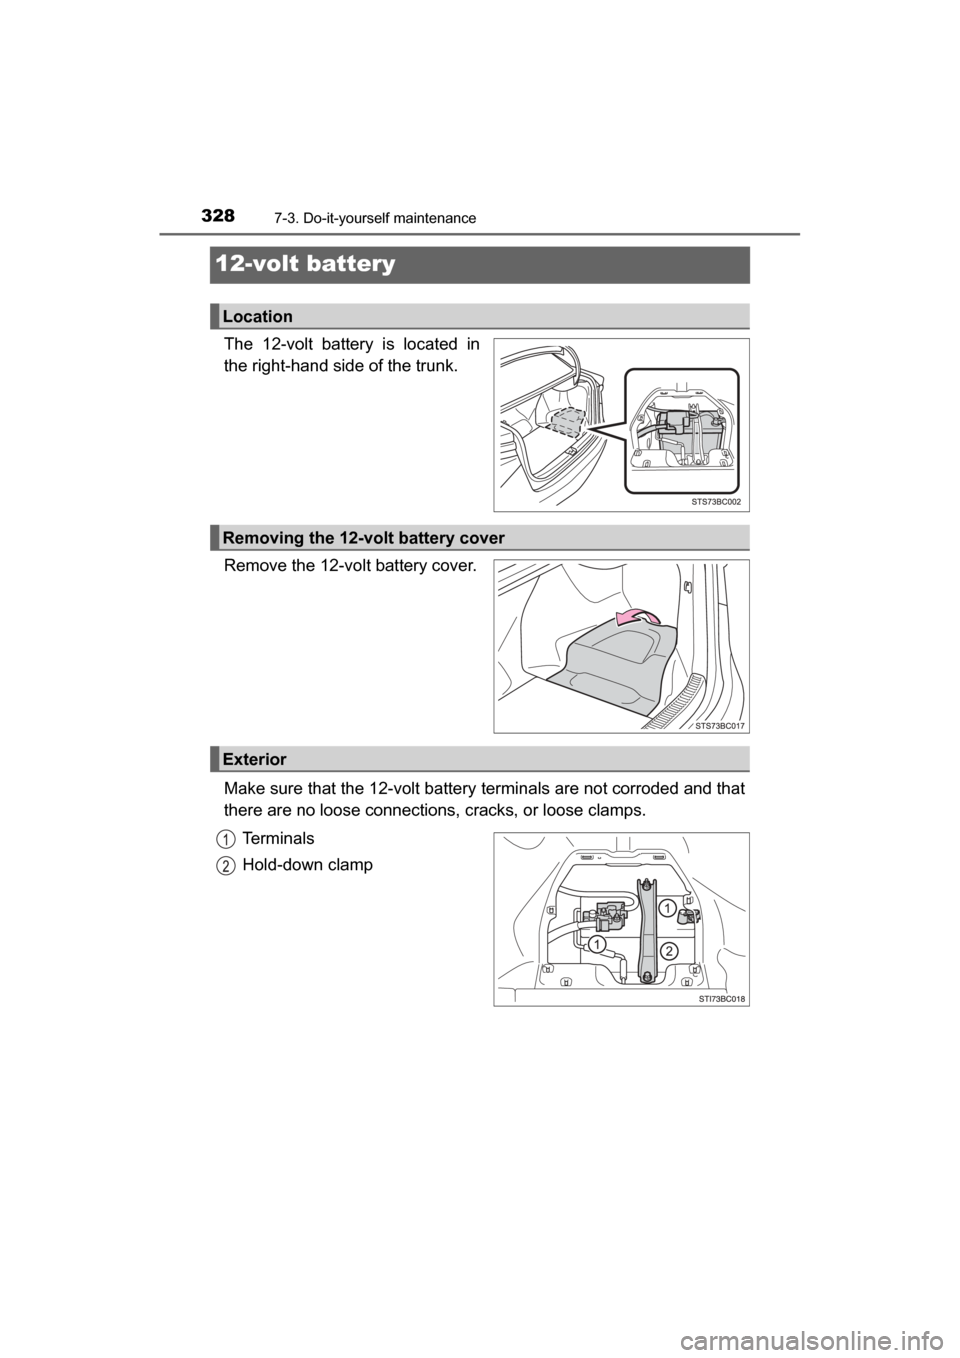 TOYOTA MIRAI 2017 1.G Owners Manual 3287-3. Do-it-yourself maintenance
MIRAI_OM_USA_OM62023U
12-volt battery
The 12-volt battery is located in
the right-hand side of the trunk.
Remove the 12-volt battery cover.
Make sure that the 12-vol